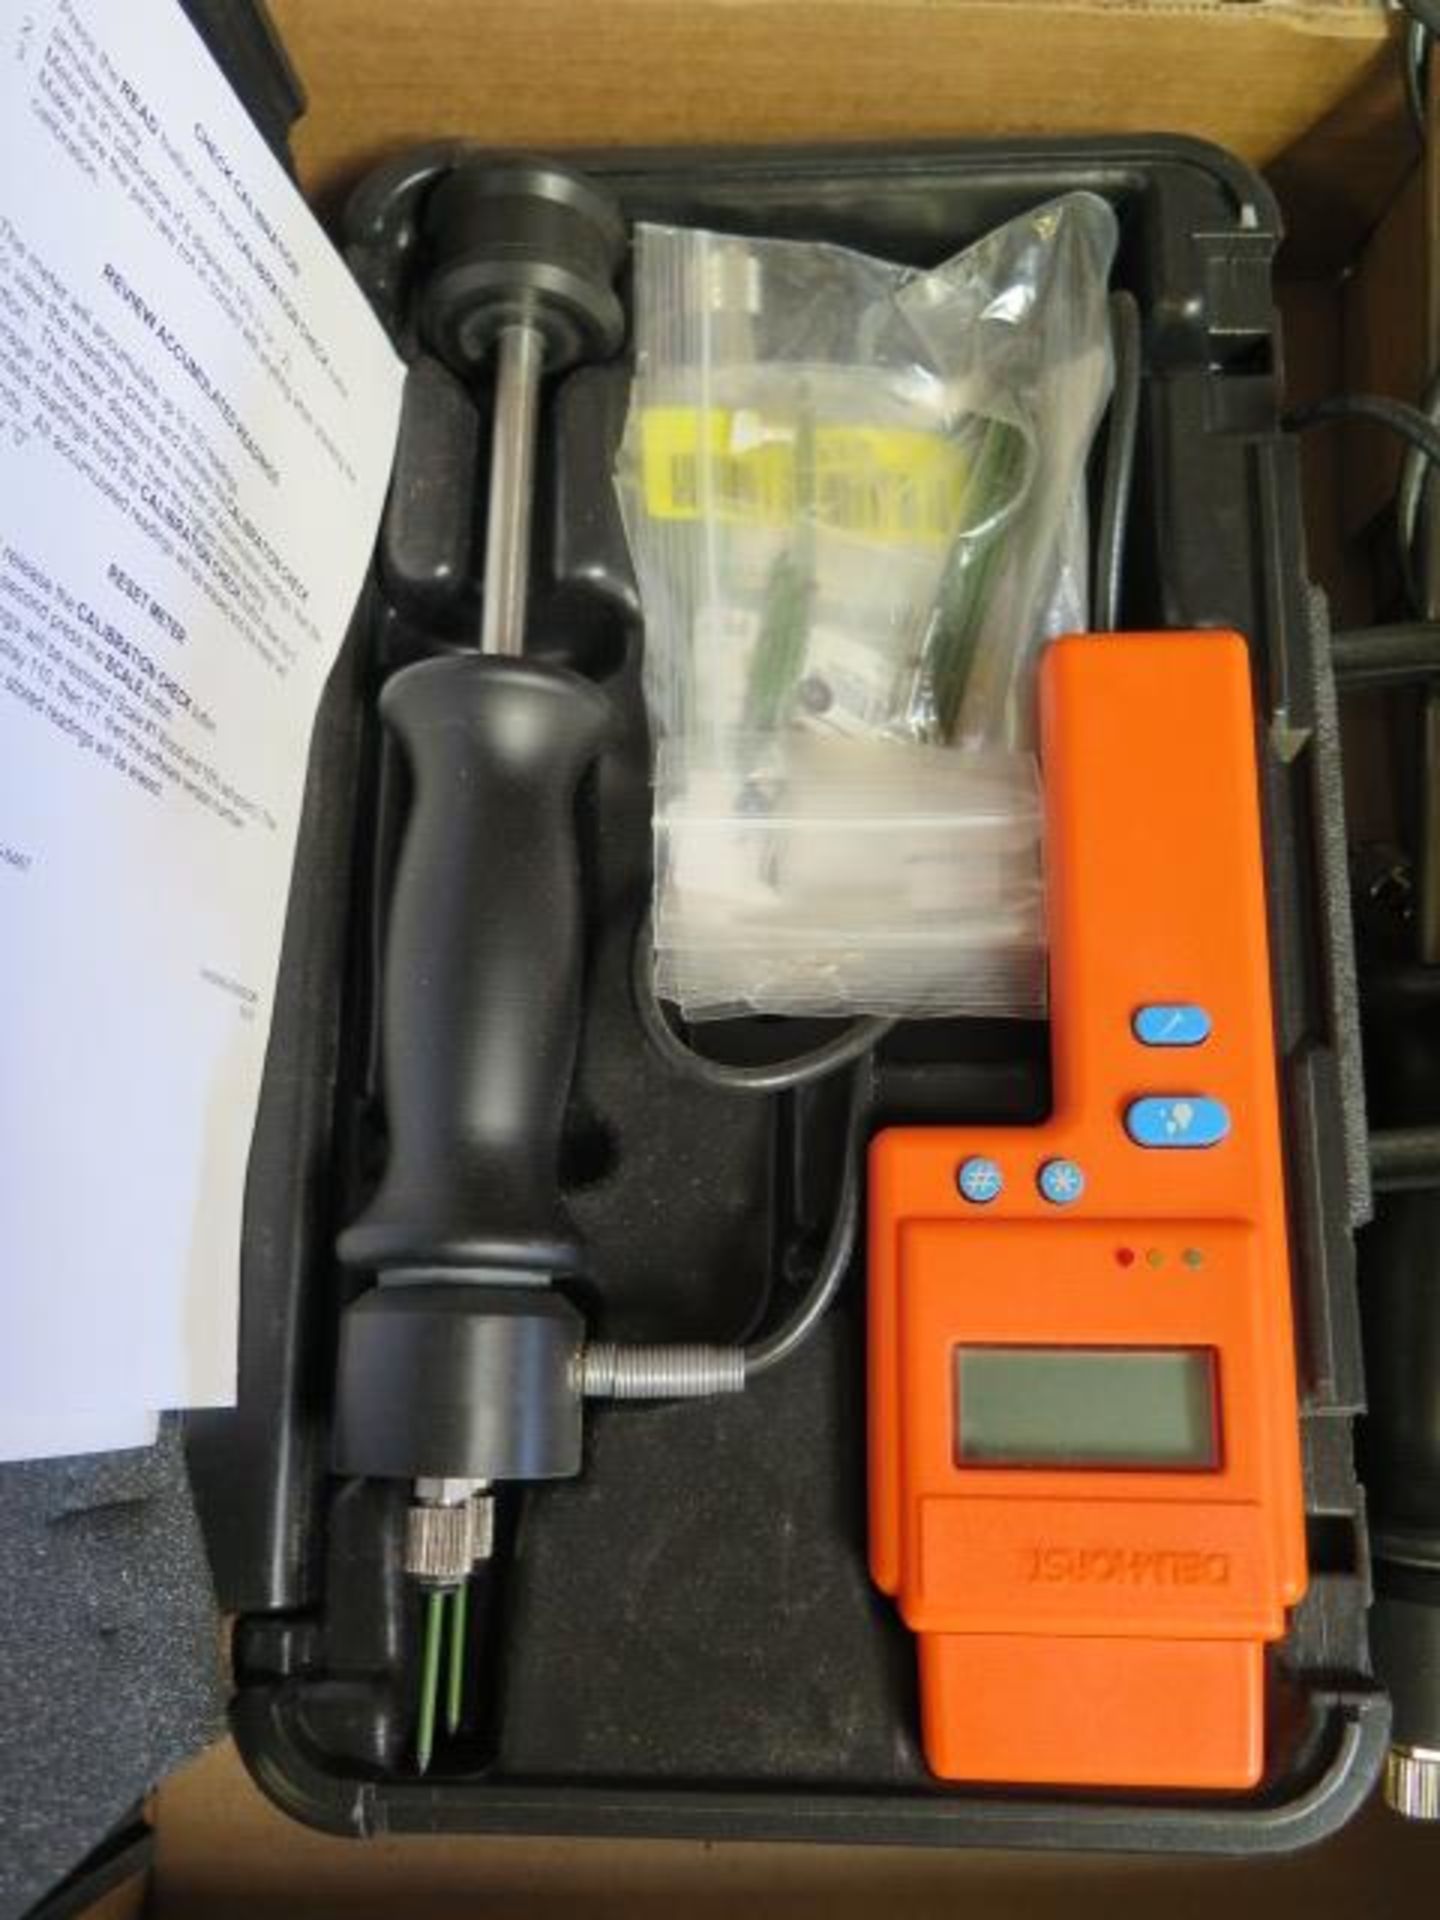 Delmhorst BD-2100 Digital Moisture Level Tester (SOLD AS-IS - NO WARRANTY) - Image 3 of 9